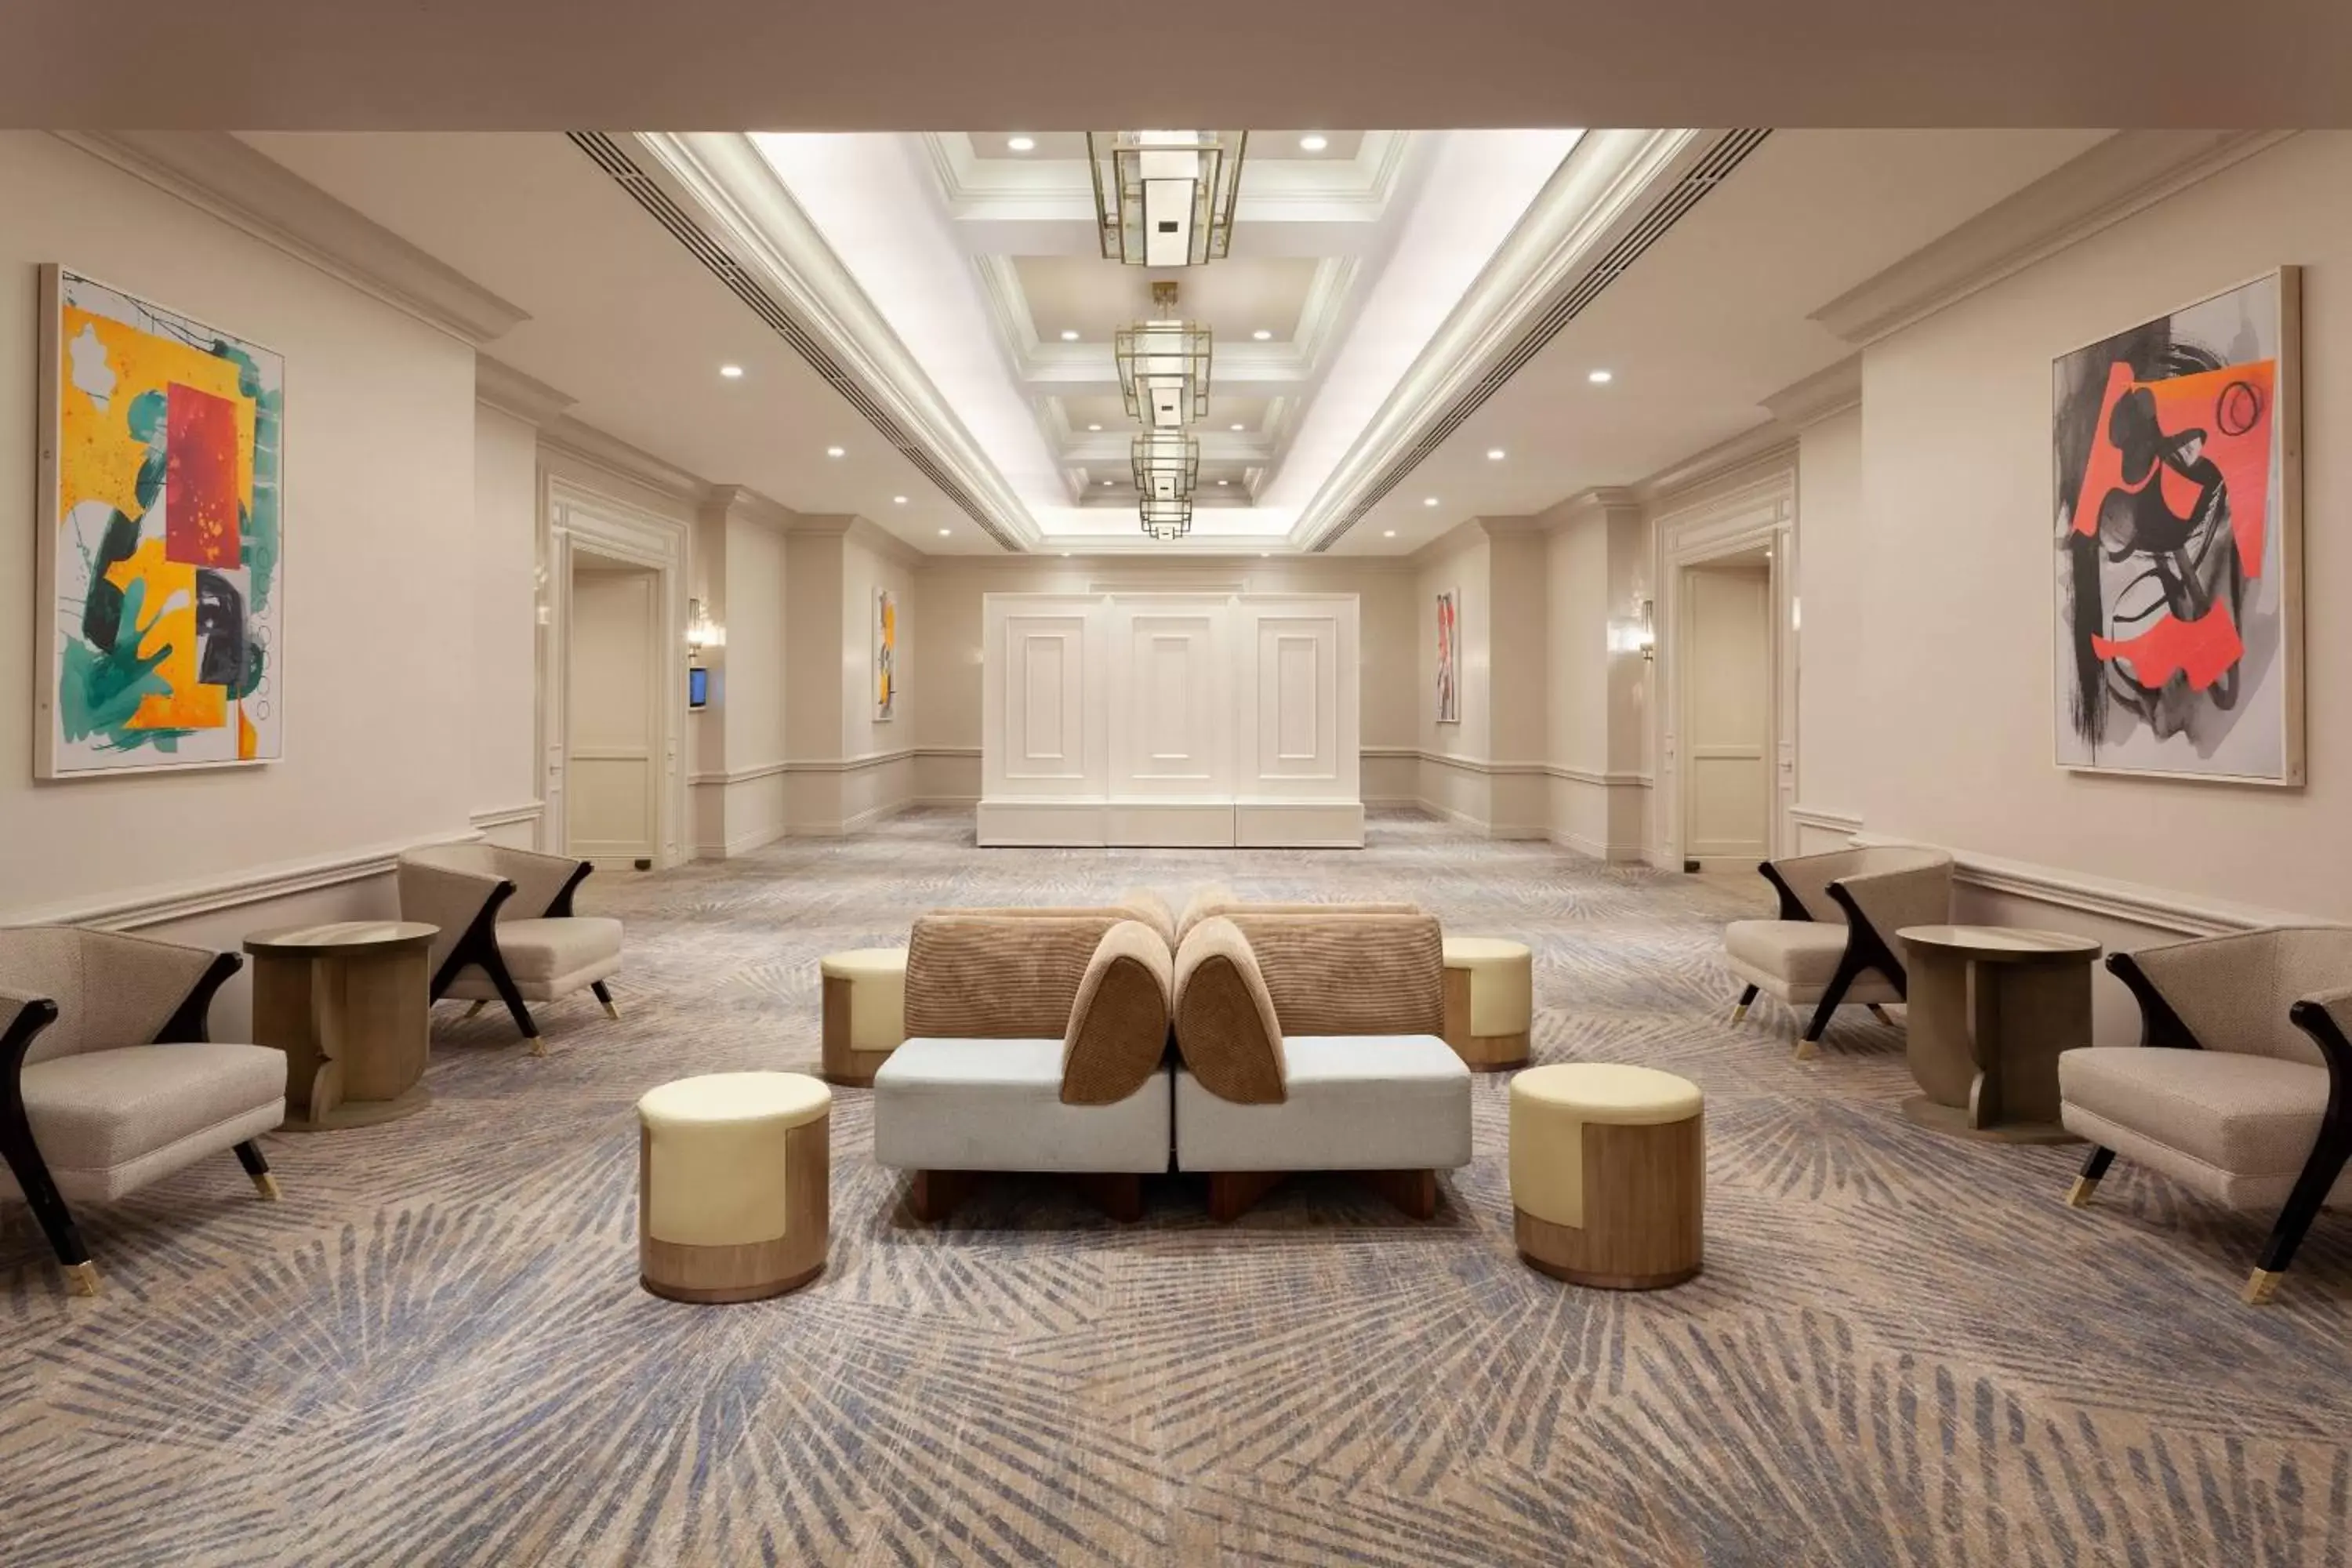 Meeting/conference room in JW Marriott Miami Turnberry Resort & Spa